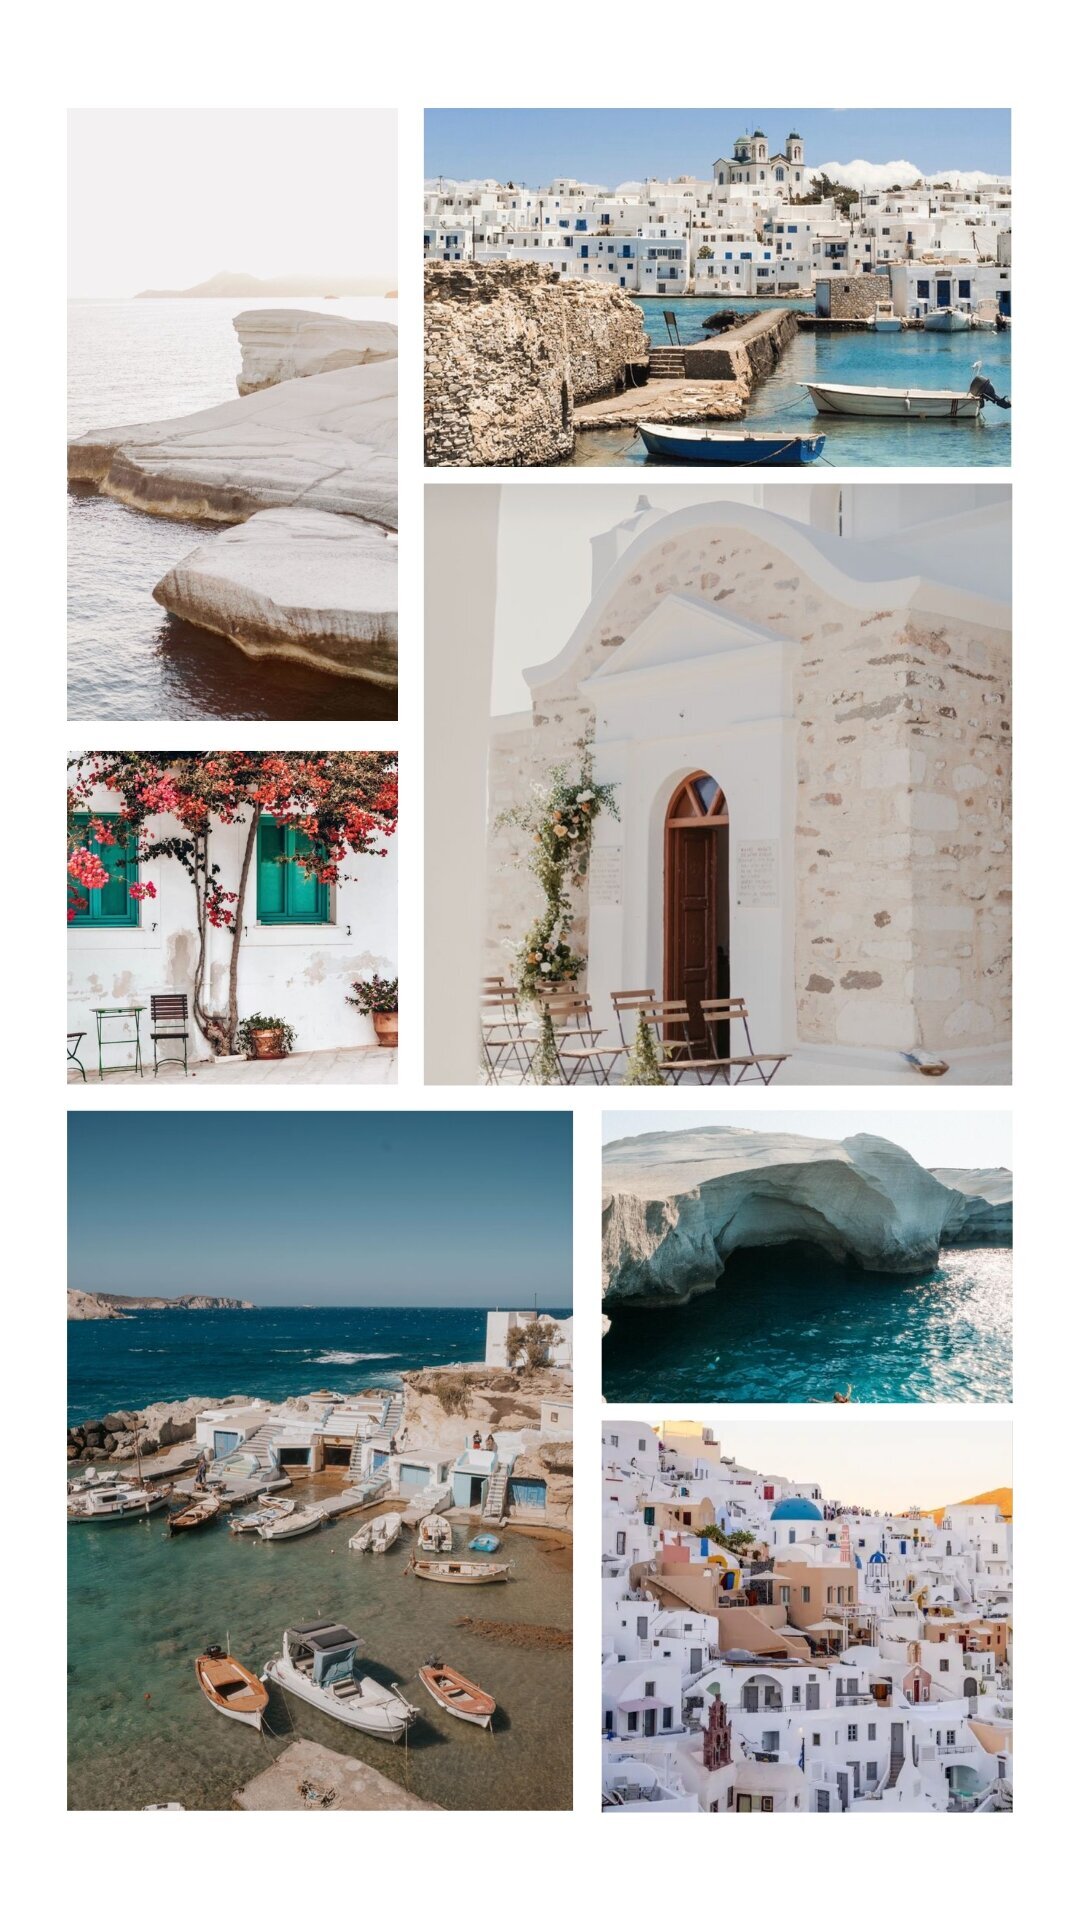 MELISSA GIRARD WITH BLV PHOTOGRAPHY AND WANDERING RETREATS IS HOSTING A RETREAT IN GREECE FOR ALL PHOTOGRAPHERS.